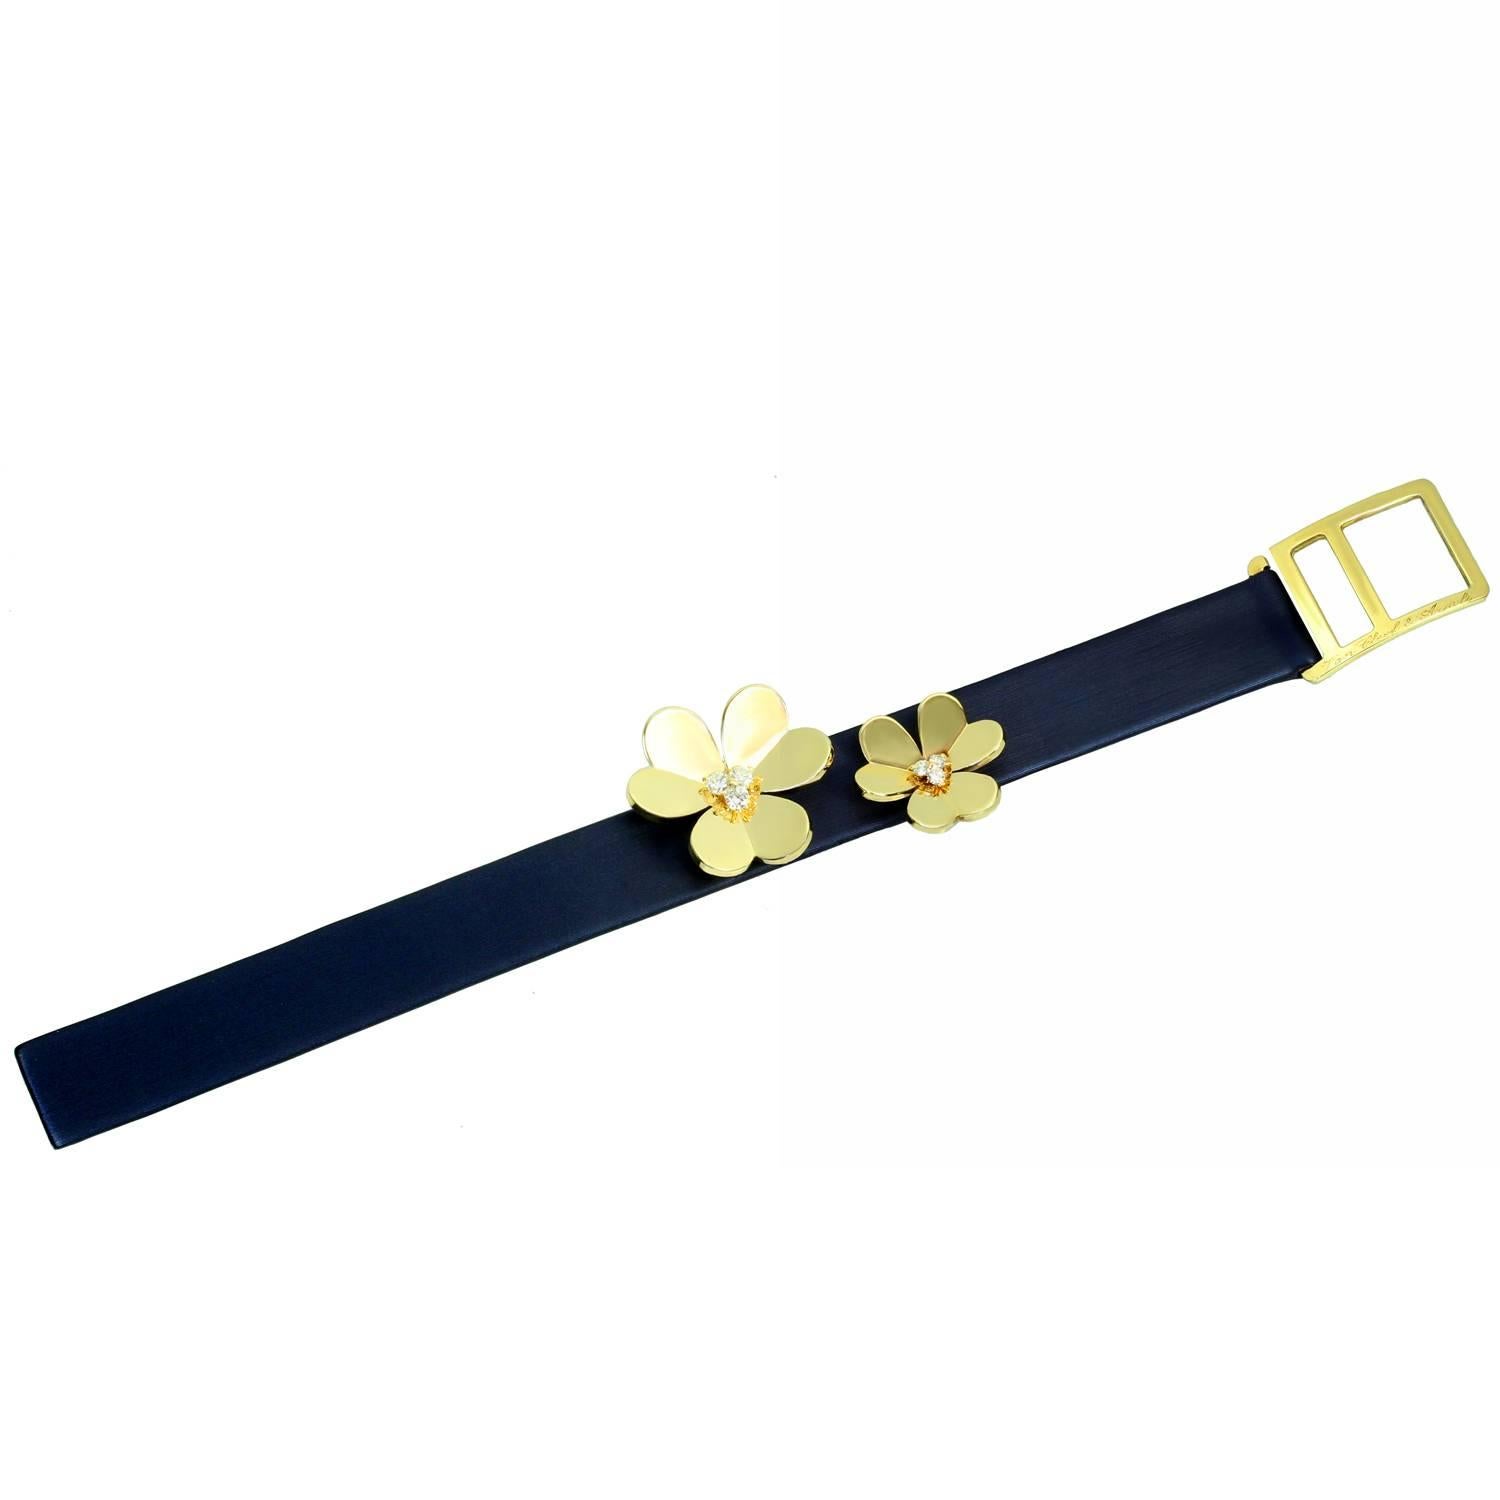 This fabulous Van Cleef & Arpels bracelet from the iconic Frivole collection features a navy blue satin on leather strap beautifully mounted with a pair graduated 18k yellow gold flowers prong-set with brilliant-cut round D-F VVS1-VVS2 diamonds of